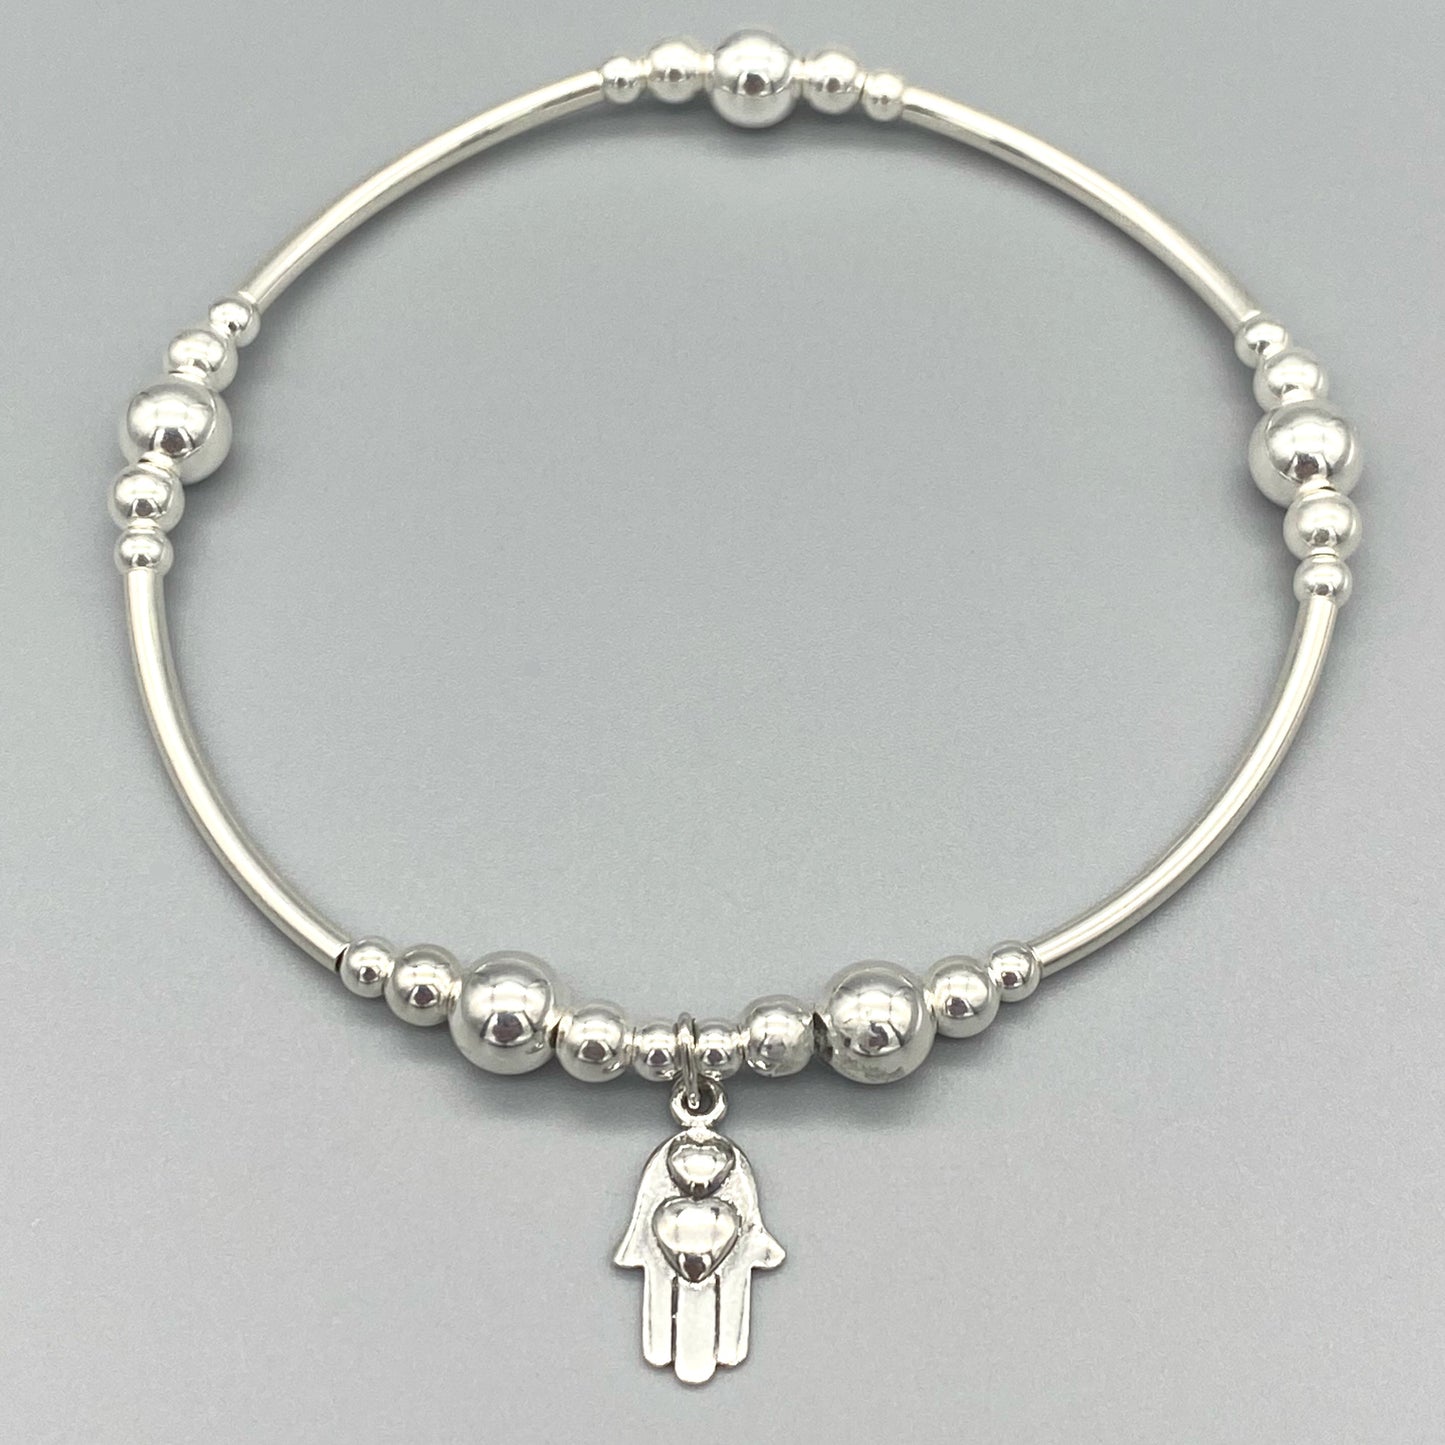 Hamsa Hand charm sterling silver stacking bracelet by My Silver Wish